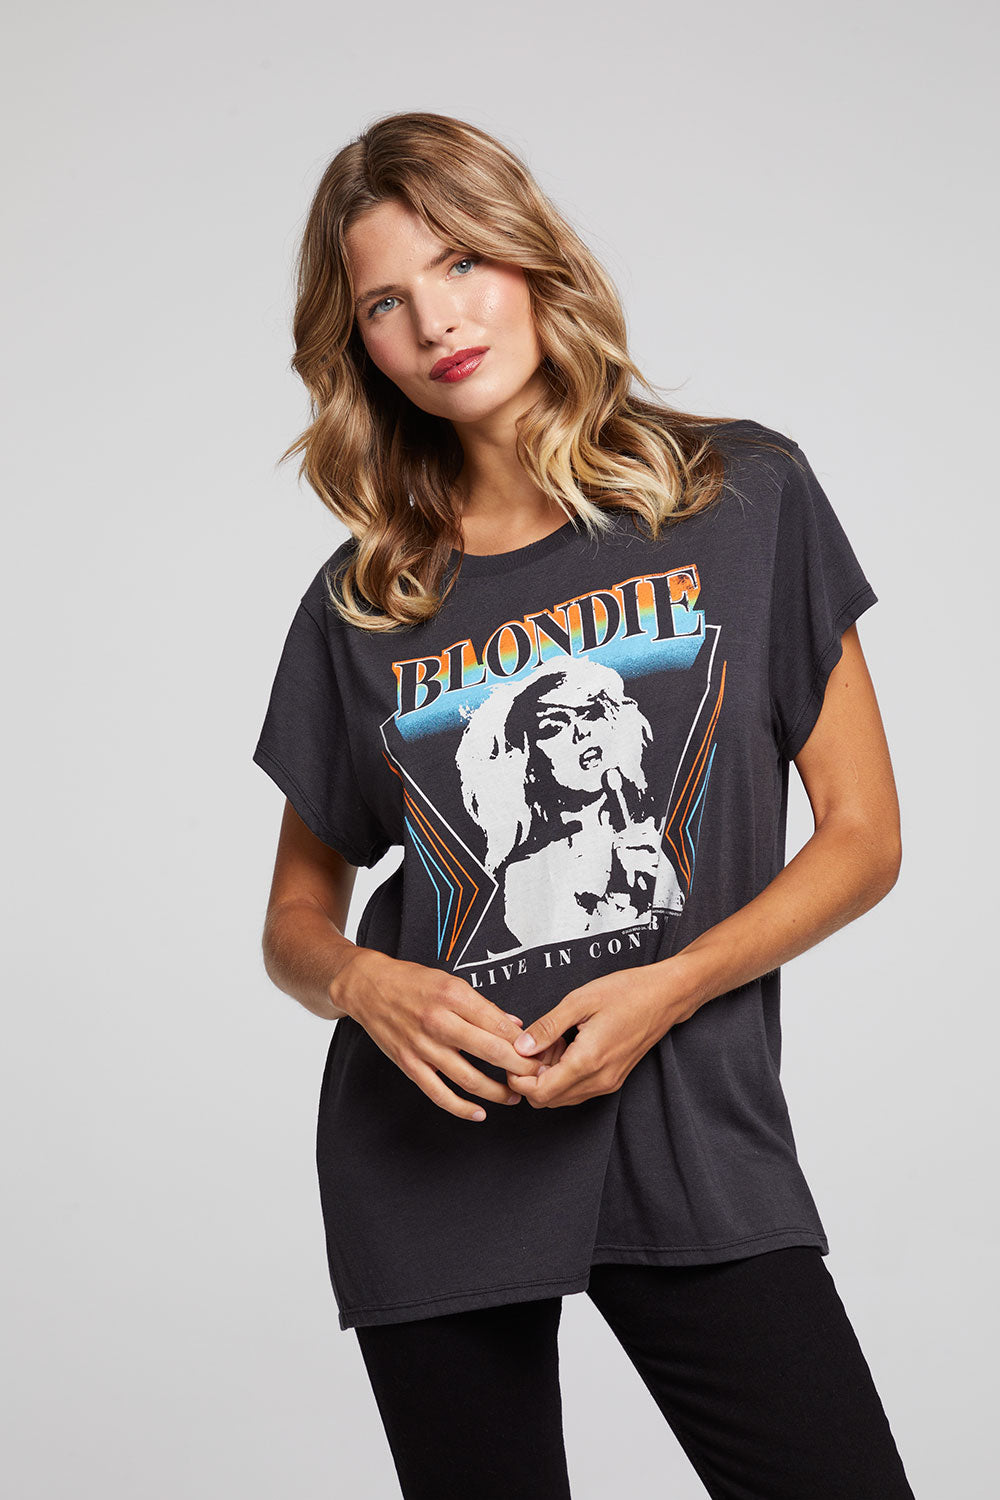 Blondie Live in Concert Tee WOMENS chaserbrand